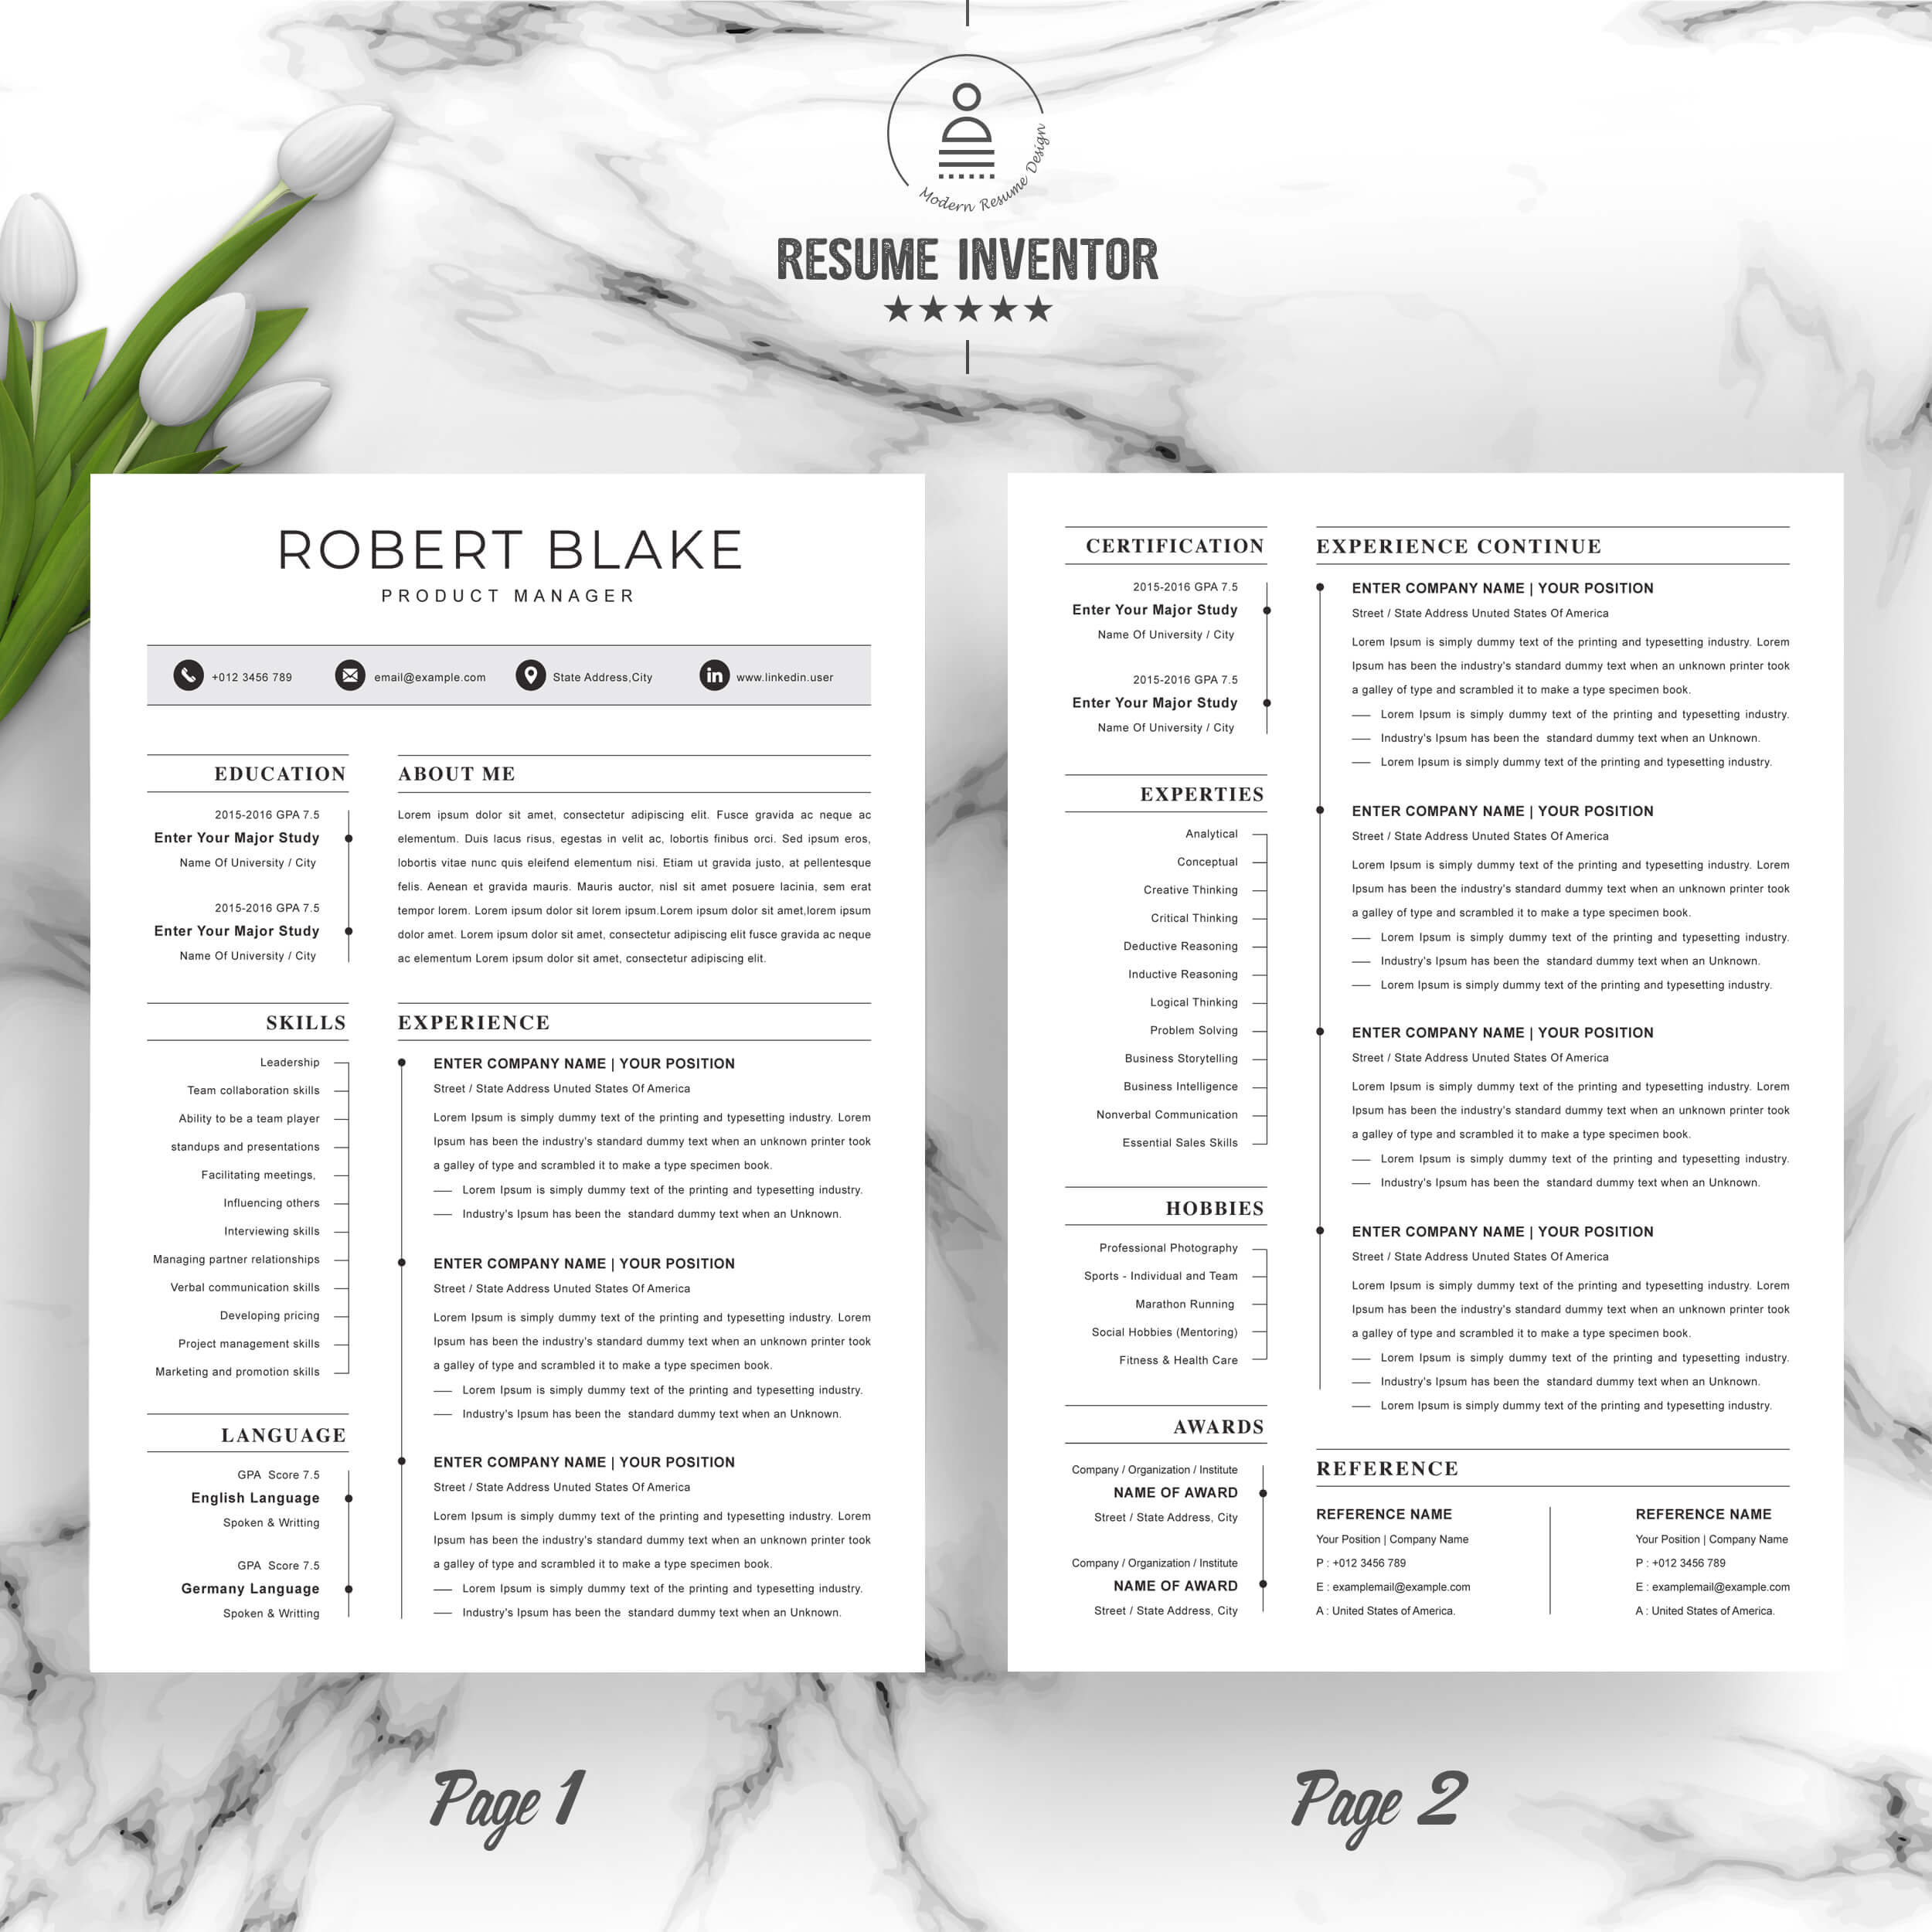 Product Manager Resume Template | Clean (CV) Resume Template preview image.